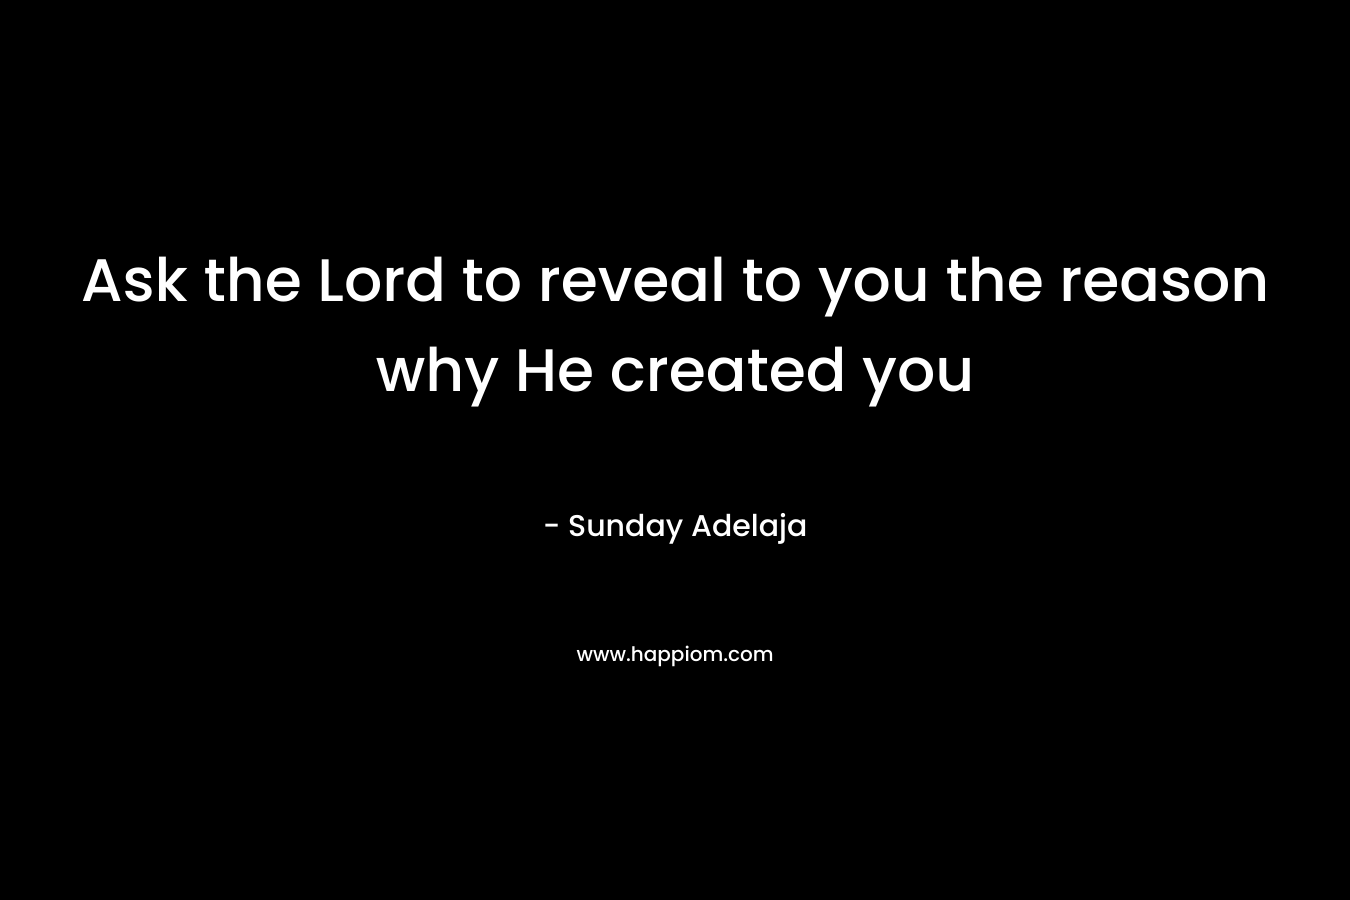 Ask the Lord to reveal to you the reason why He created you